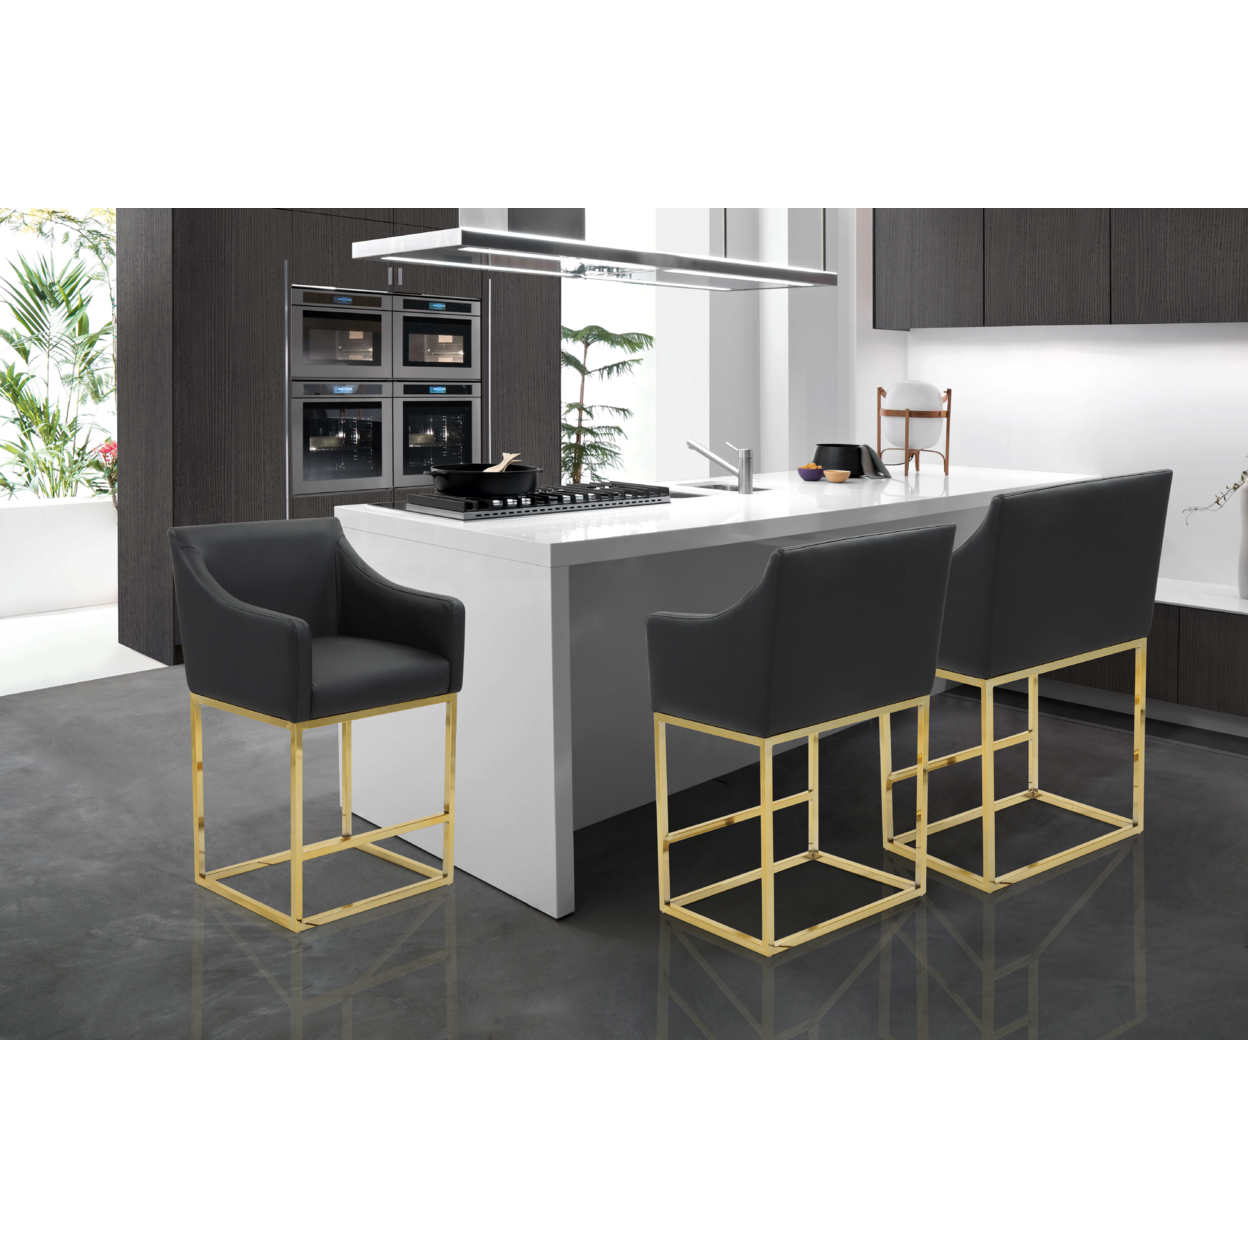 Etna Bar Stool Or Counter Stool Chair PU Leather Upholstered Slope Arm Design Architectural Goldtone Solid Metal Base - Black, Height: 38.25